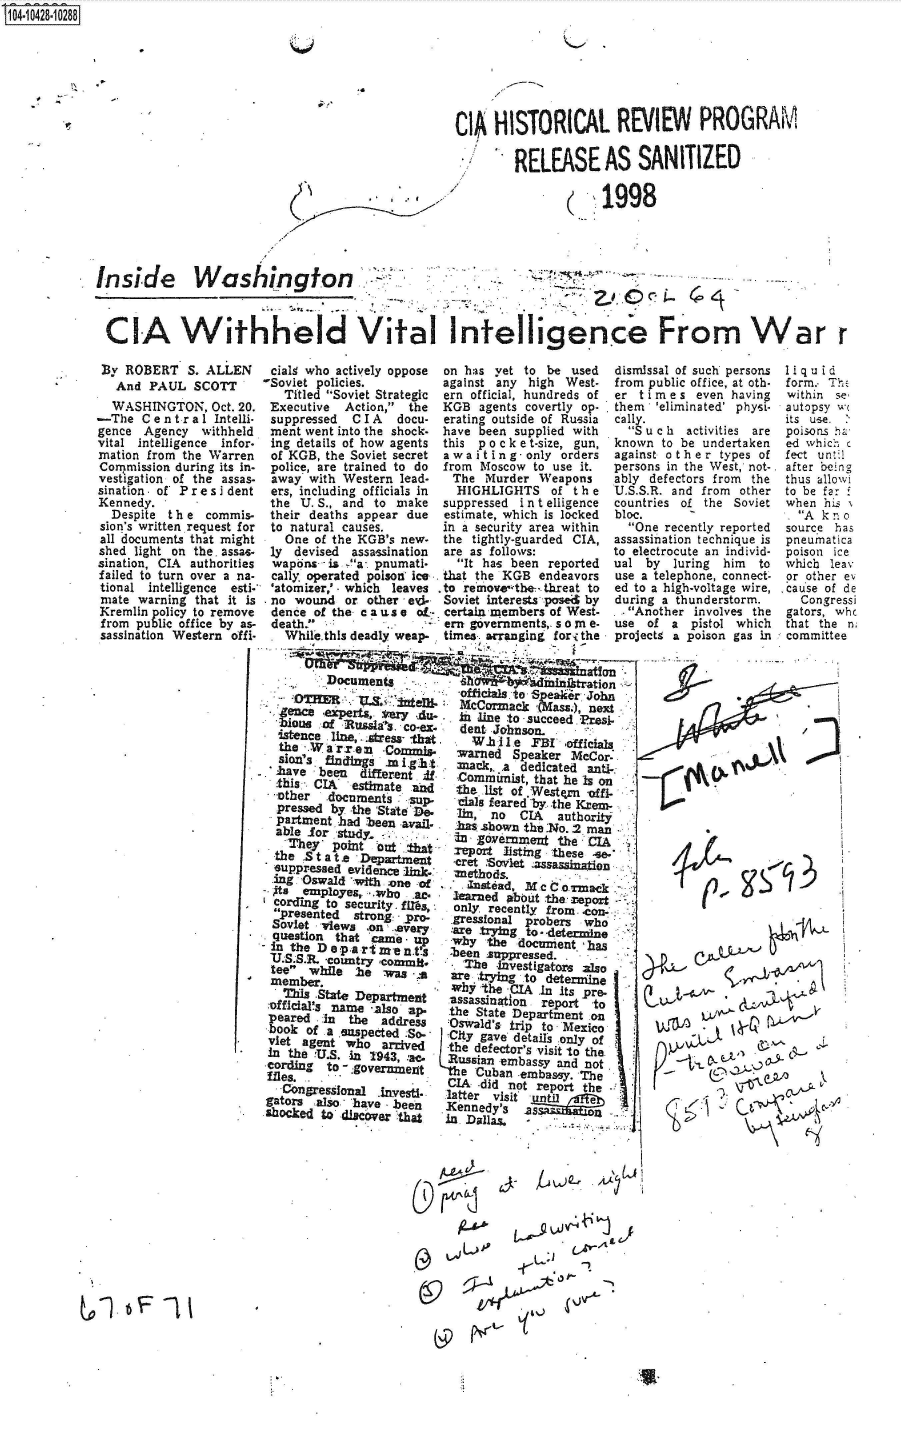 handle is hein.jfk/jfkarch48585 and id is 1 raw text is: S104-10428-10288


Q


CI HISTORICAL REVIEW PROGRAM

        RELEASE AS SANITIZED

                     1998


Inside Washington



CIA Withheld Vital InteI1igence From War r


By  ROBERT   S. ALLEN
   And PAUL   SCOTT
   WASHINGTON,  Oct. 20.
-The  C e n t r a 1 Intelli-
gence  Agency  withheld
vital intelligence infor-
mation from the Warren
Commission during its in-
vestigation of the assas-
sination . of Pr e s i dent
Kennedy.
  Despite the   commis-
sion's written request for
all documents that might
shed light on the. assas-
sination, CIA authorities
failed to turn over a na-
tional intelligence esti-
mate  warning that it is
Kremlin policy to remove
from  public office by as-
sassination Western offi-


cialg who actively oppose on has yet to  be used  dismi
-Soviet policies.         against any high West.  from
   Titled Soviet Strategic ern official, hundreds of  er t
 Executive  Action, the  KGB  agents covertly op. . them
 suppressed  C I A docu-  erating outside of Russia cally.
 ment went into the shock- have been supplied with  S
 ing details of how agents this p o c k e t-size, gun, know
 of KGB, the Soviet secret a waiting -only orders again
 police, are trained to do from Moscow to use it. perso
 away  with Western lead-  The  Murder Weapons    ably
 ers, including officials in HIGHLIGHTS  of the   U.S.S
 the U. S., and to make   suppressed i n t elligence  count
 their deaths appear due  estimate, which is locked bloc.
 to natural causes.       in a security area within O
   One of the KGB's new.  the tightly-guarded CIA, assas
 ly devised  assassination are as follows: to ele
 wapons.- is 'a-. pnumati-  It has been reported ual
 cally operated poison ice. that the KGB endeavors use a
 'atomizer,' - which leaves to remove the-- threat to  ed to
 no  wound  or other ed-  Soviet interests posed by durin
 dence of the c a us e of- certain members of West- ..A
 death.          .       em  governments,. so in e- use
   While.this deadly weap- times arranging forithe proje


          Documentsnitato,
                            -Officials to S eakerJohn
          .O~R U&   ~       McCormia   (Mass.), next
  enca aexperts,      AIM,   i line to succeed Presi-
  bioug  of 'usl~    O!x     et   ono          :
  istence line,.stress that.   t  1e  FB   officials
  the      rre   -Commis-   Warned  Speaker MeCor-
  SIOfl'3 findings m l,91h1 mlack  . dedicated anti-
  have  been  different .if Comxmist,  that he is on
  .this ,CIA' estimate and  the. list of Western vfi- -
  other  documents   sup-    als feared by the KrCn




  Srtment  d stron   r      rsinl      rbr
  question   heStt           ee    gn n o CAdethrity
  pathe    had   m   bem -shown the NO. 2 man
  able  r  study - ernMerne               the CIA

  he Sinta      .r n tat reportsting these -
    theS at   Department   -cret .'SoVlet .assassinaden
  suppressed evidence link-: -Methods.
  ang 'Oswald wivvt one -of. jntaM           m
  c-. m x to security. fhires,  learned about -the report -
  co rdsnto ecd iyf~       only. recently from. 4con-
    pesntdstrong-  Pro-   gressional probers who
 Soviet views  -on .every  :are trytng to - deter-line
 questilon that 'came -j . why  the documient has
 -E inte earmns  -been JsUPPressed.
   S.S.R. country corm Ih        -investigators 3150
 teer.hle~       ws'       are ,trying to determ~ine
 Mmb-aer.      patmn       why the -CIA In its Pre.
         ThisStae Deartent assassination report 'to
 :officials name -also ap-. the State Department on
 p eared in the  address   Oswald's trip to Mexico.
       bookof asuspctedSo-  City gave details only of
 viet agent who  ar-vd     the defector's visit 'to the.
 In the VU.S. -in 9439, ac, Russian embassy and not
 cording to.-.:gOvOZfmezt The Cuban -embassy. The
     files.I .     - IAdid not report the
   Congressfonal Inves    latter visi
gators  also - have bee   Kennentsil
shocked to disc'ver -that i   ali     ..        --





                          (¾                .


4b              I   f


ssal of such persons
public office, at oth-
i me s even having
'eliminated' physi-
u c h activities are
n to be undertaken
st other  types of
ns in the West, not-.
defectors from the
.R. and from other
ries of the Soviet

ne recently reported
sination technique is
ctrocute an individ-
by  luring him  to
telephone, connect-
a high-voltage wire,
g a thunderstorm.
nother involves the
of a  pistol which
cts a poison gas in


Iiq uid
form. Th,
within se.
autopsy w
its use. .
poisons ha
ed which c
fect unt;1
after being
thus allowi
to be far
when  his 1
. Ak  no
source has
pneunatica
poison ice
which leav
or other ev
cause of de
  Congressi
gators, whc
that the n;
committee


     L~4ArL




wu0C

          ' - A^


&

  ~ IVt~


I


